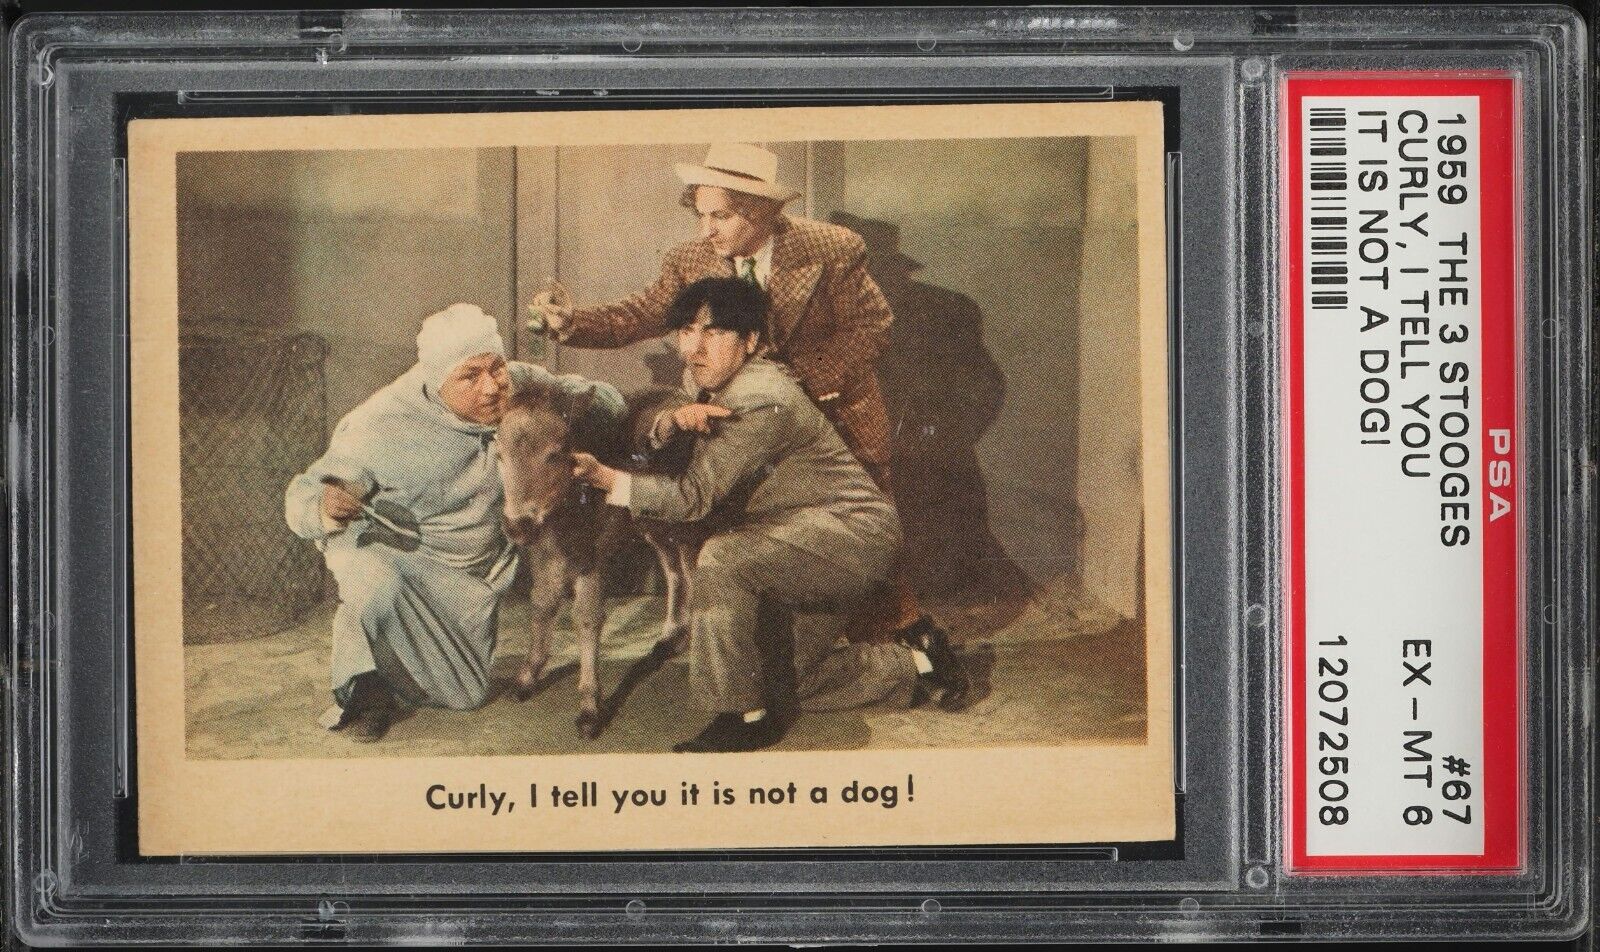 1959 Fleer The 3 Three Stooges Curly, I Tell You It Is Not A Dog #67 PSA 6